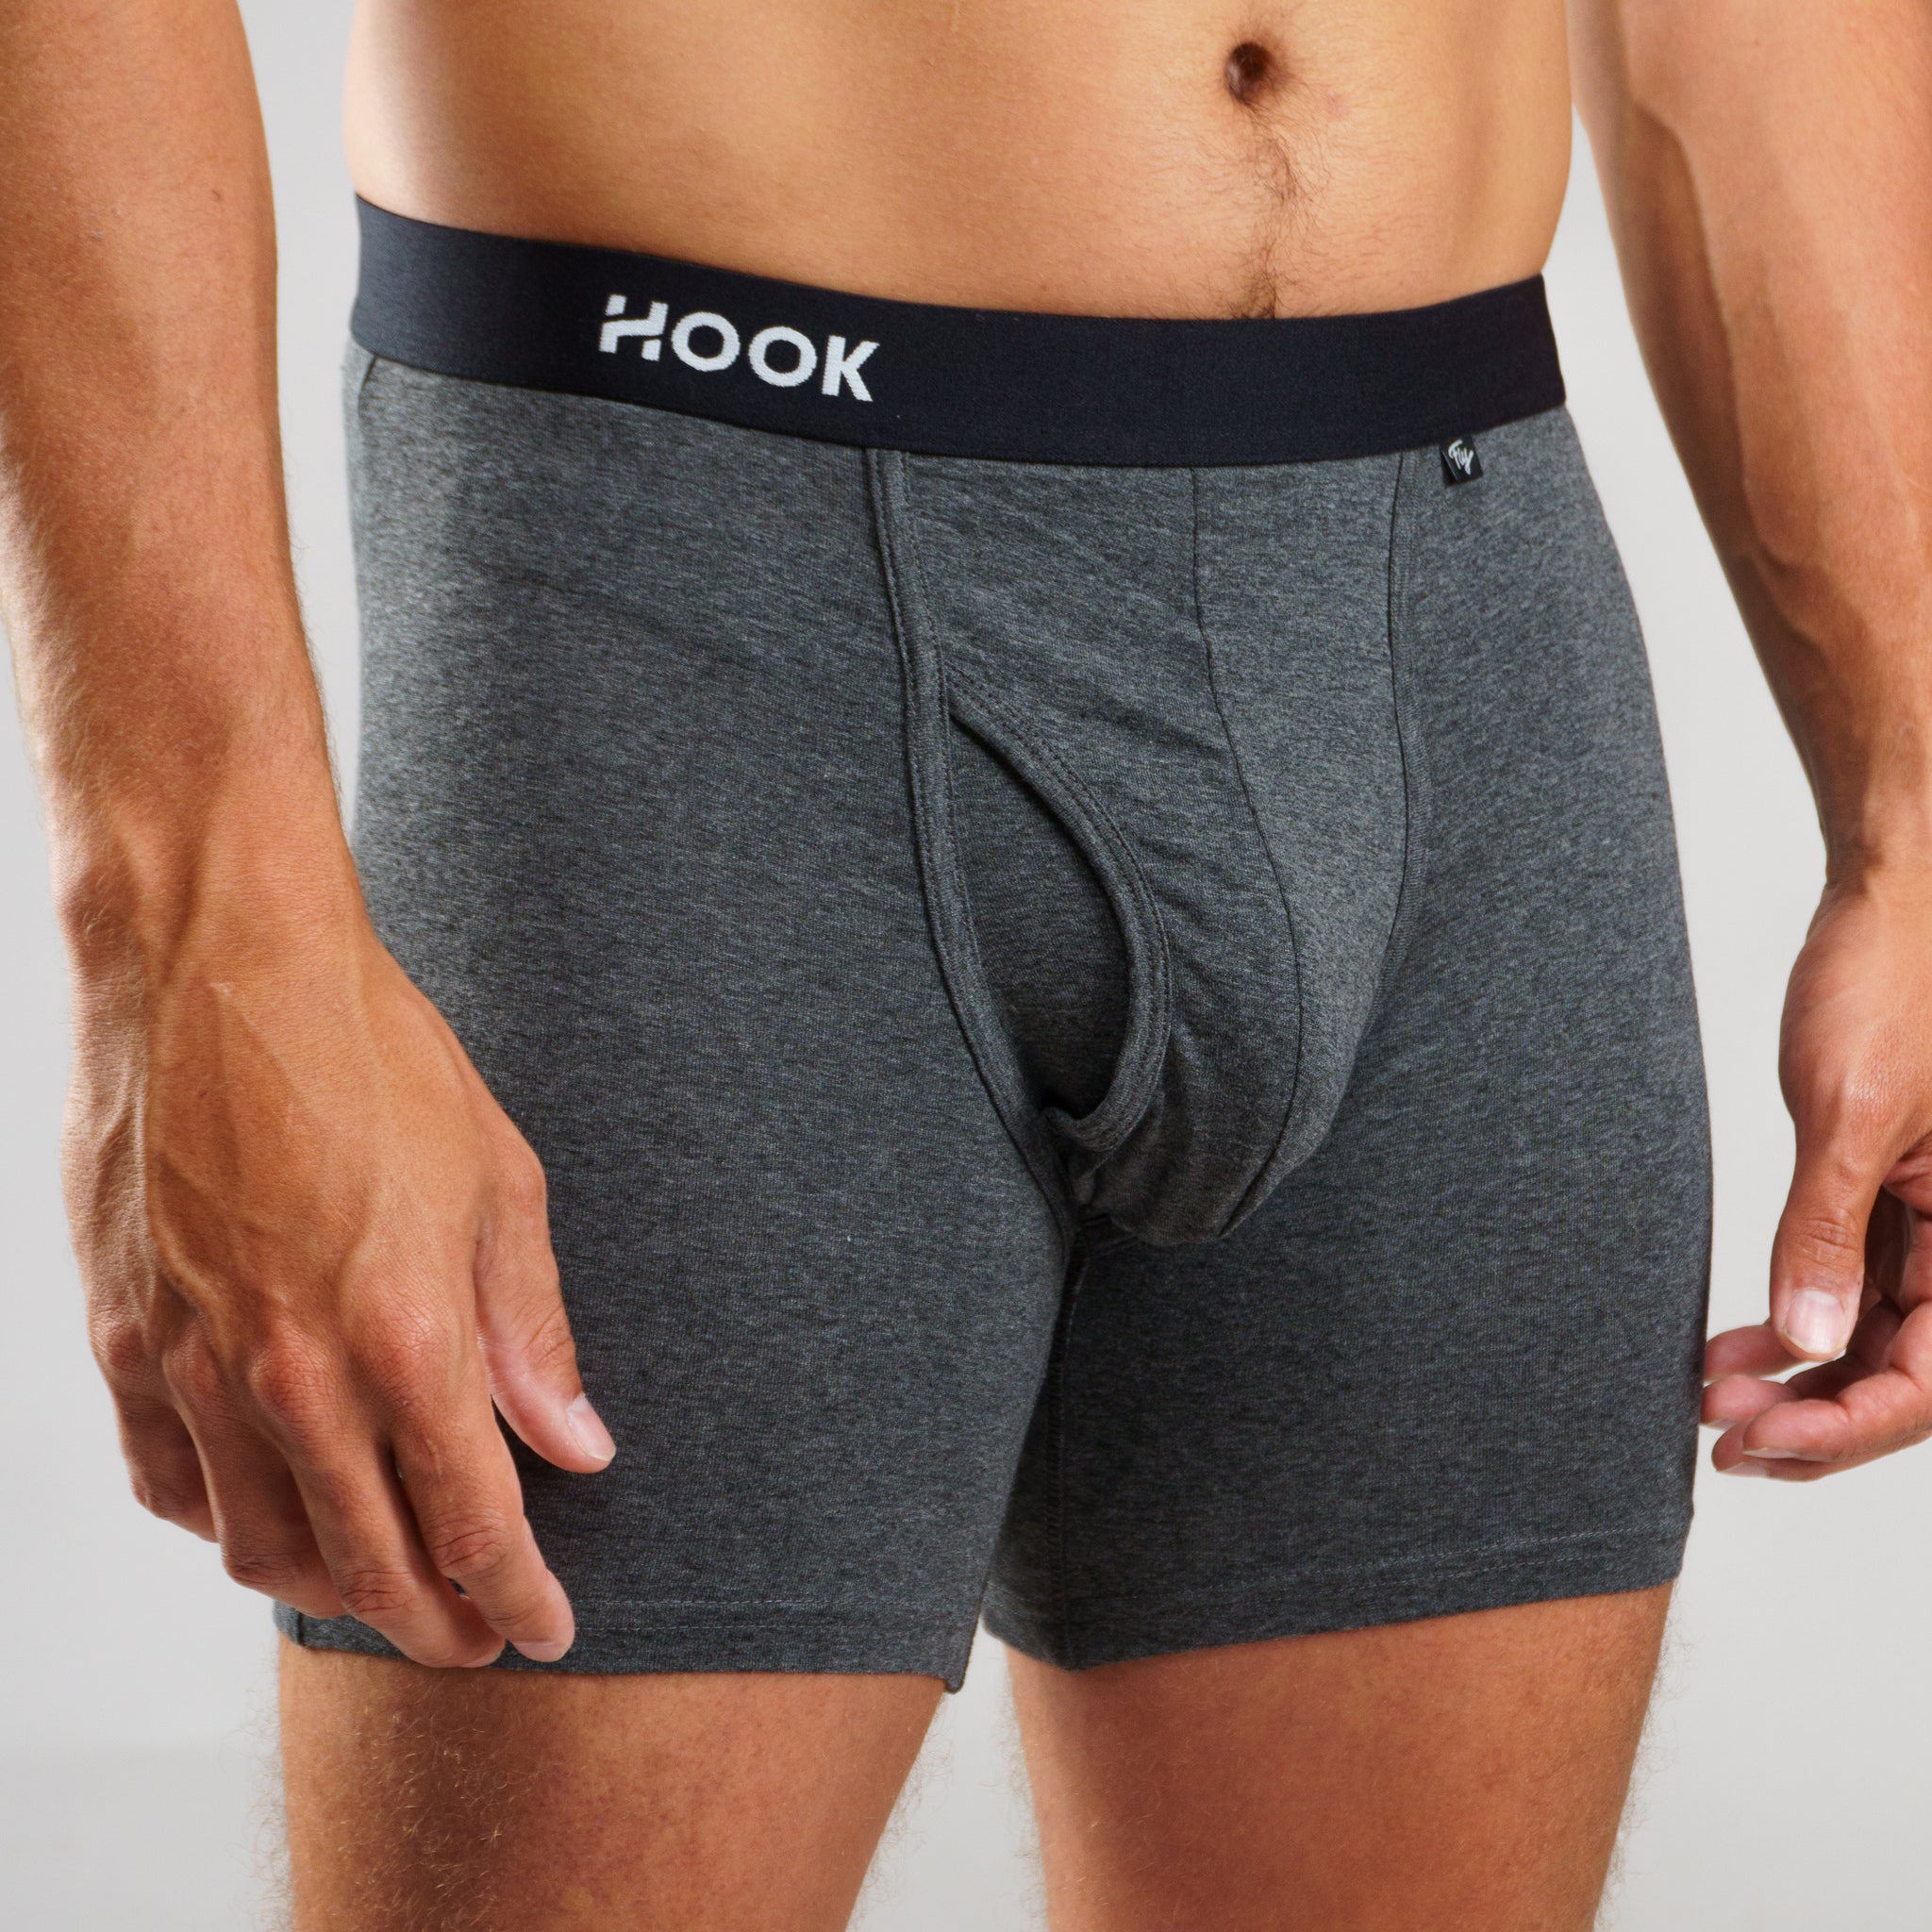 Fly Boxer Brief : Charcoal